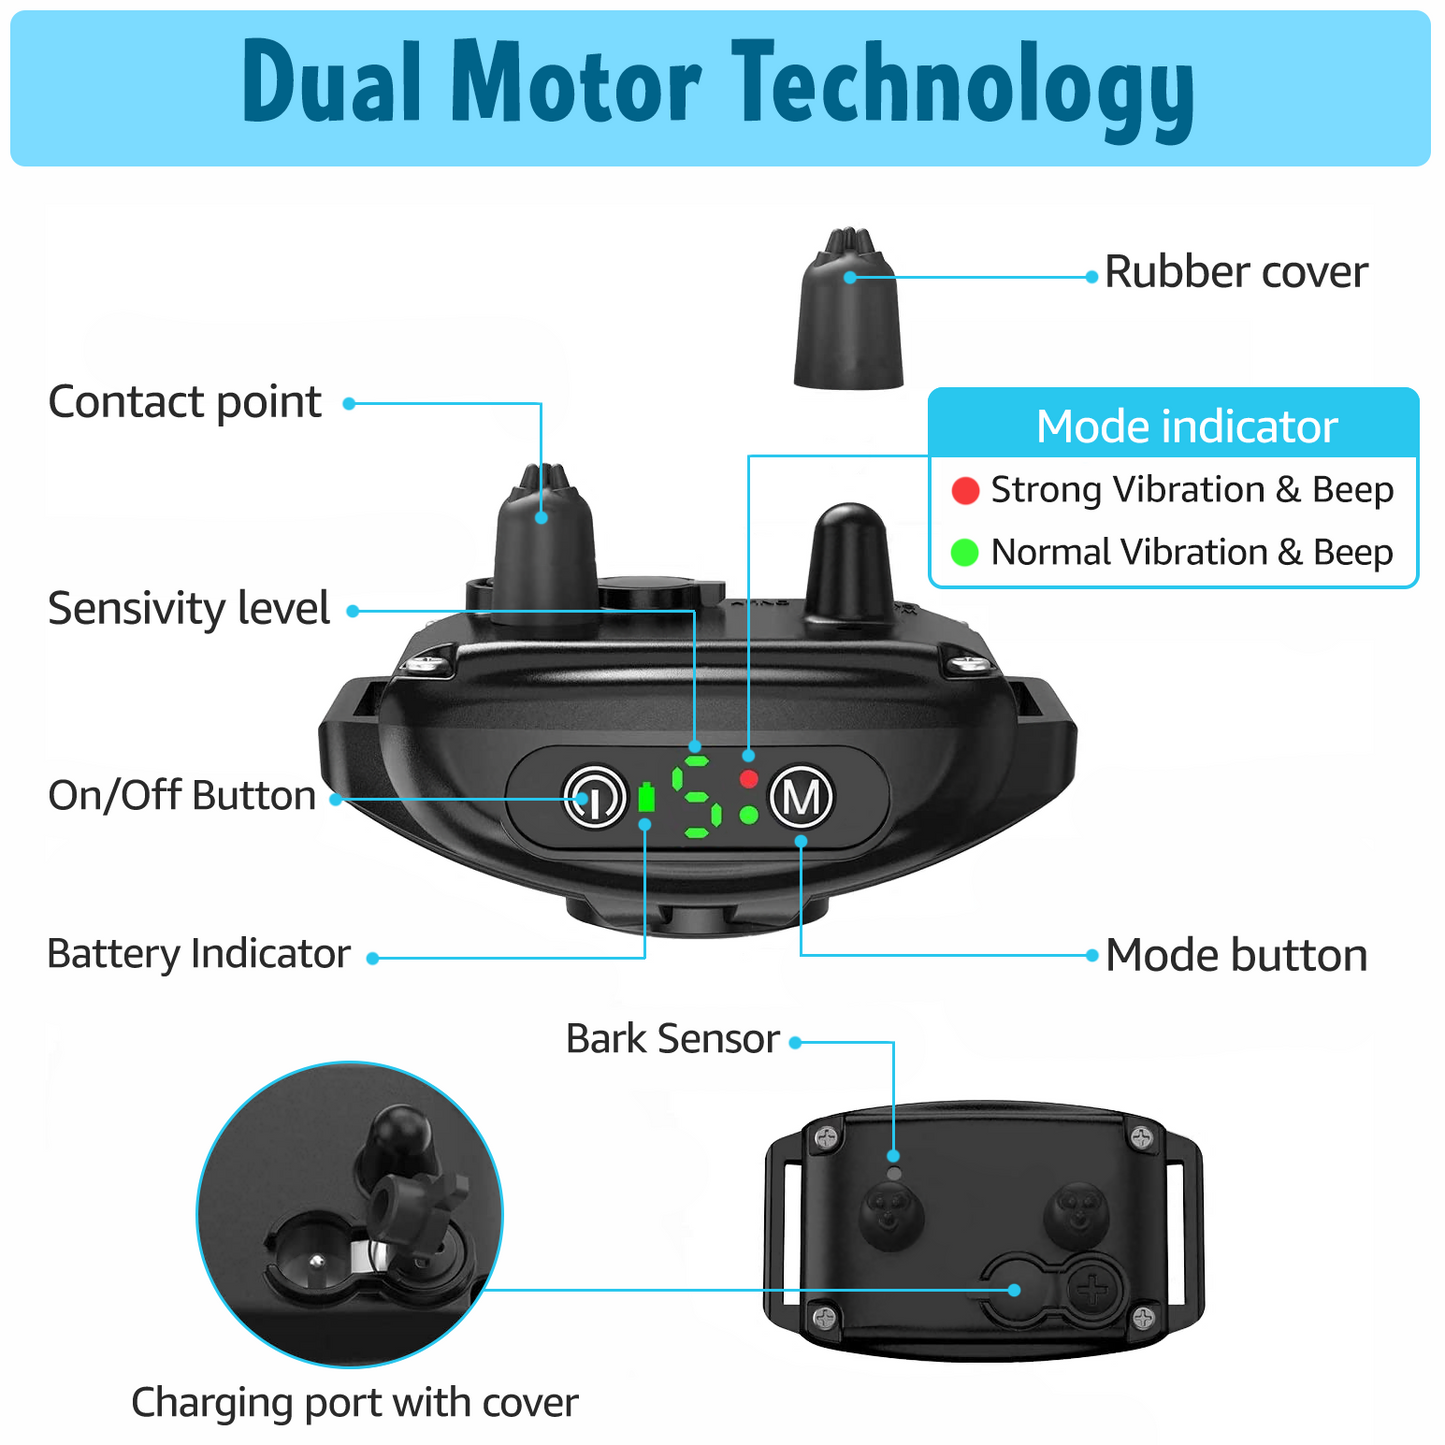 dual motor technology: contact point, sensivity level, on/off button, battery indicator, rubber cover, mode button, bark sensor, charging port with cover